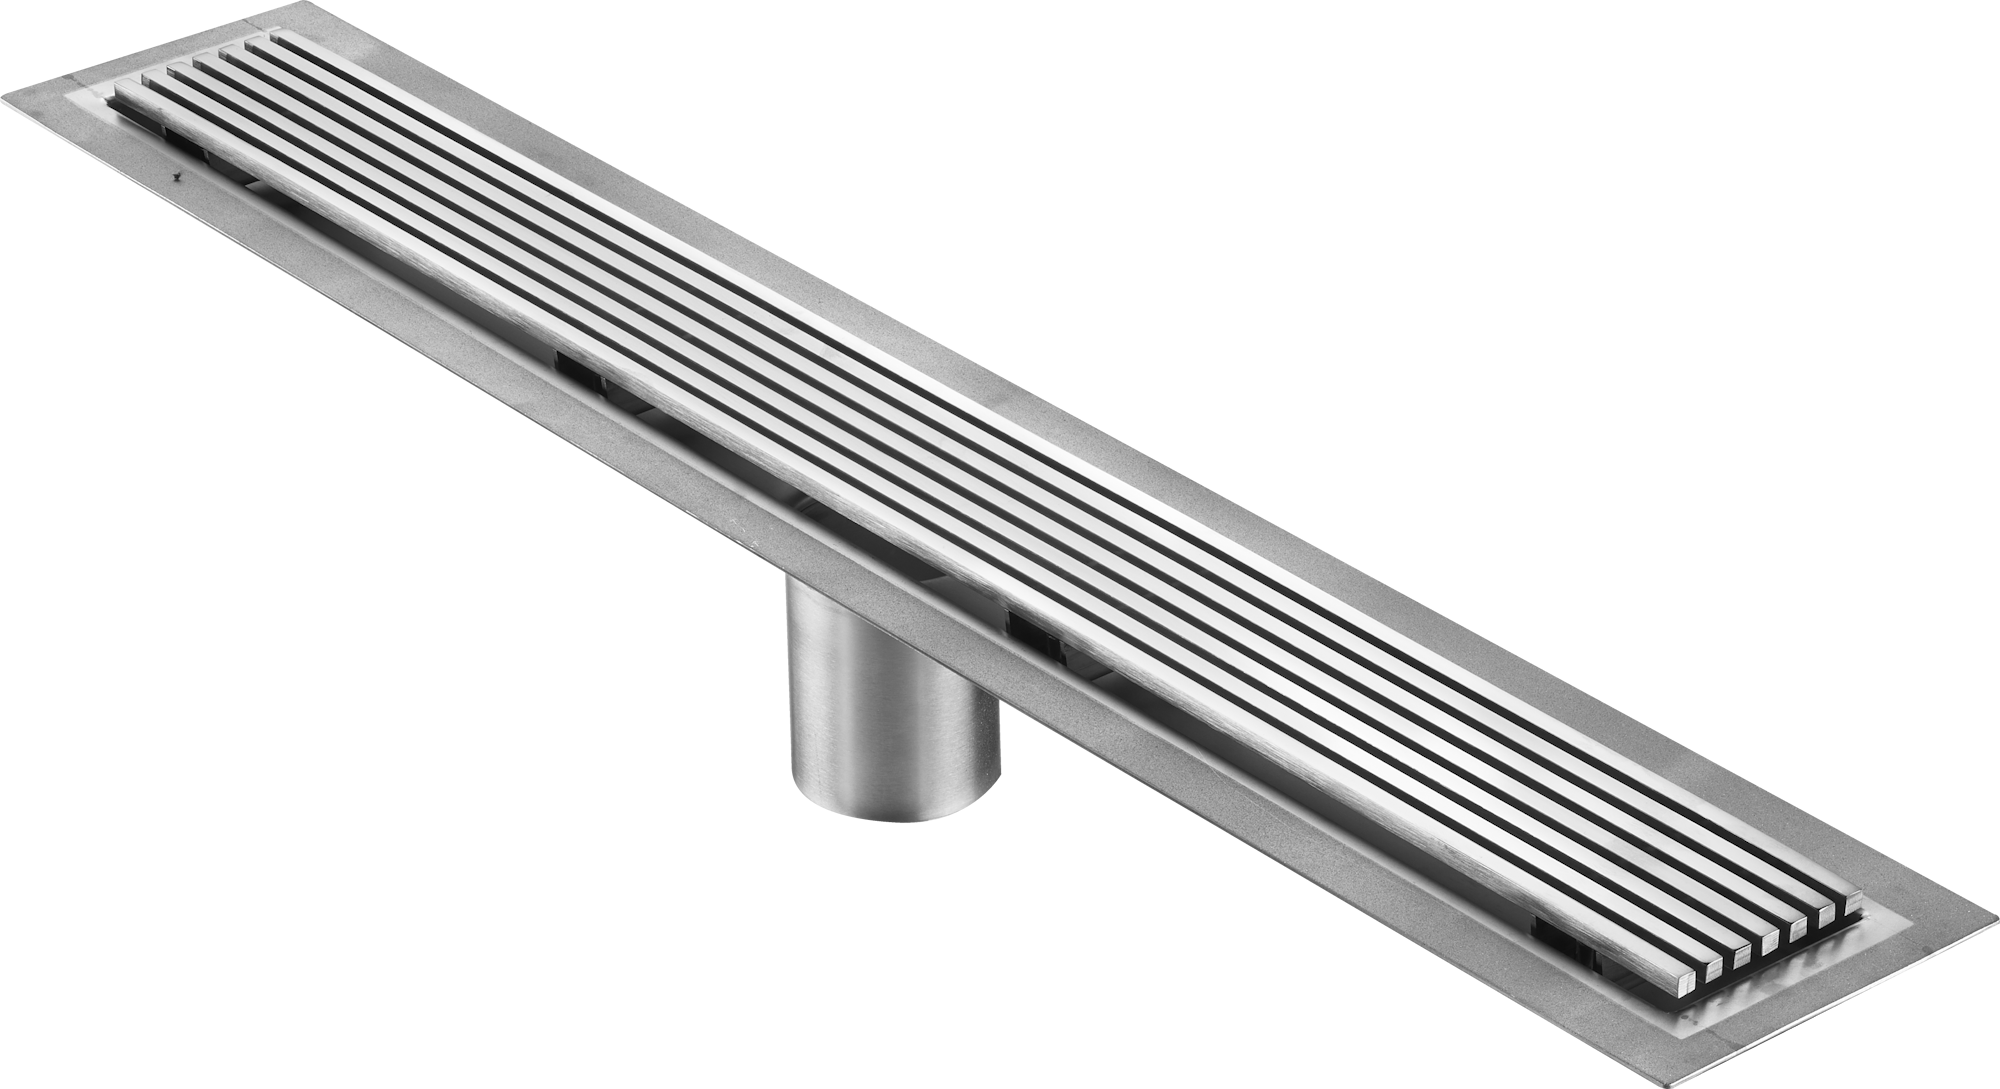 39 Inch Wedge Wire Grate Linear Drain Polished Stainless Steel, Drains Unlimited